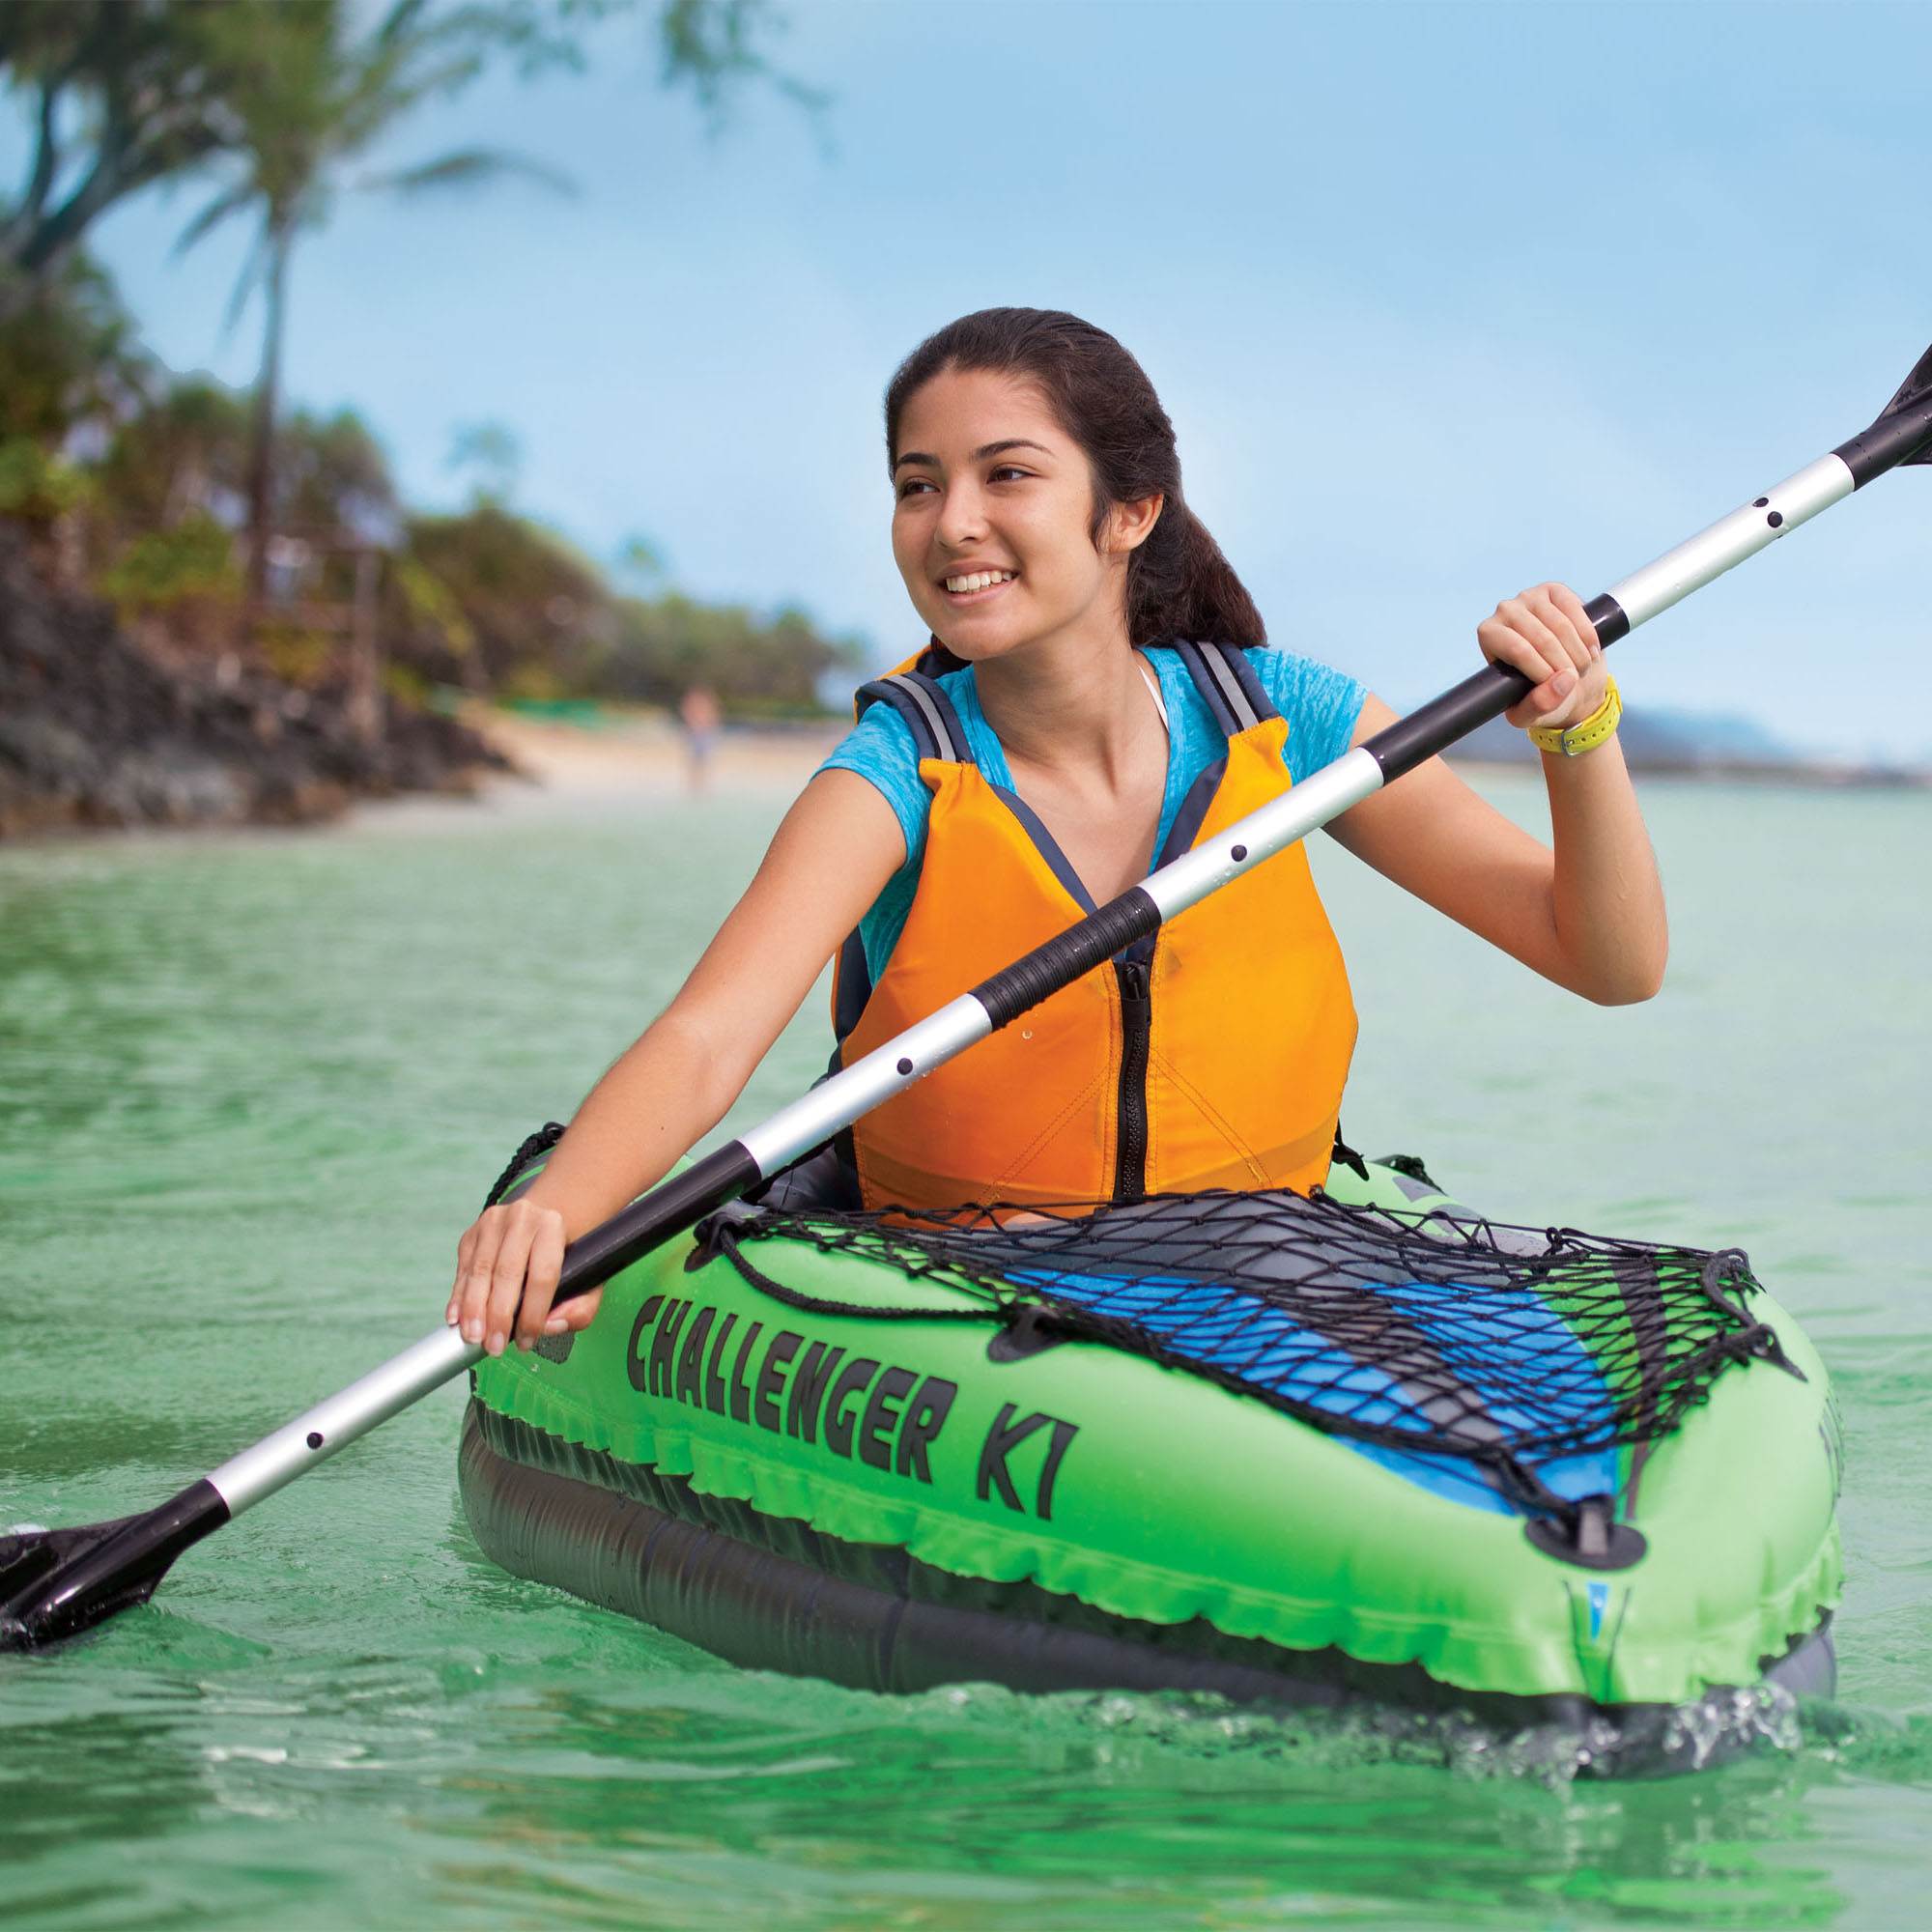 Intex Challenger K1 Inflatable Single Person Kayak Set and Accessory Kit w/ Pump - image 4 of 6